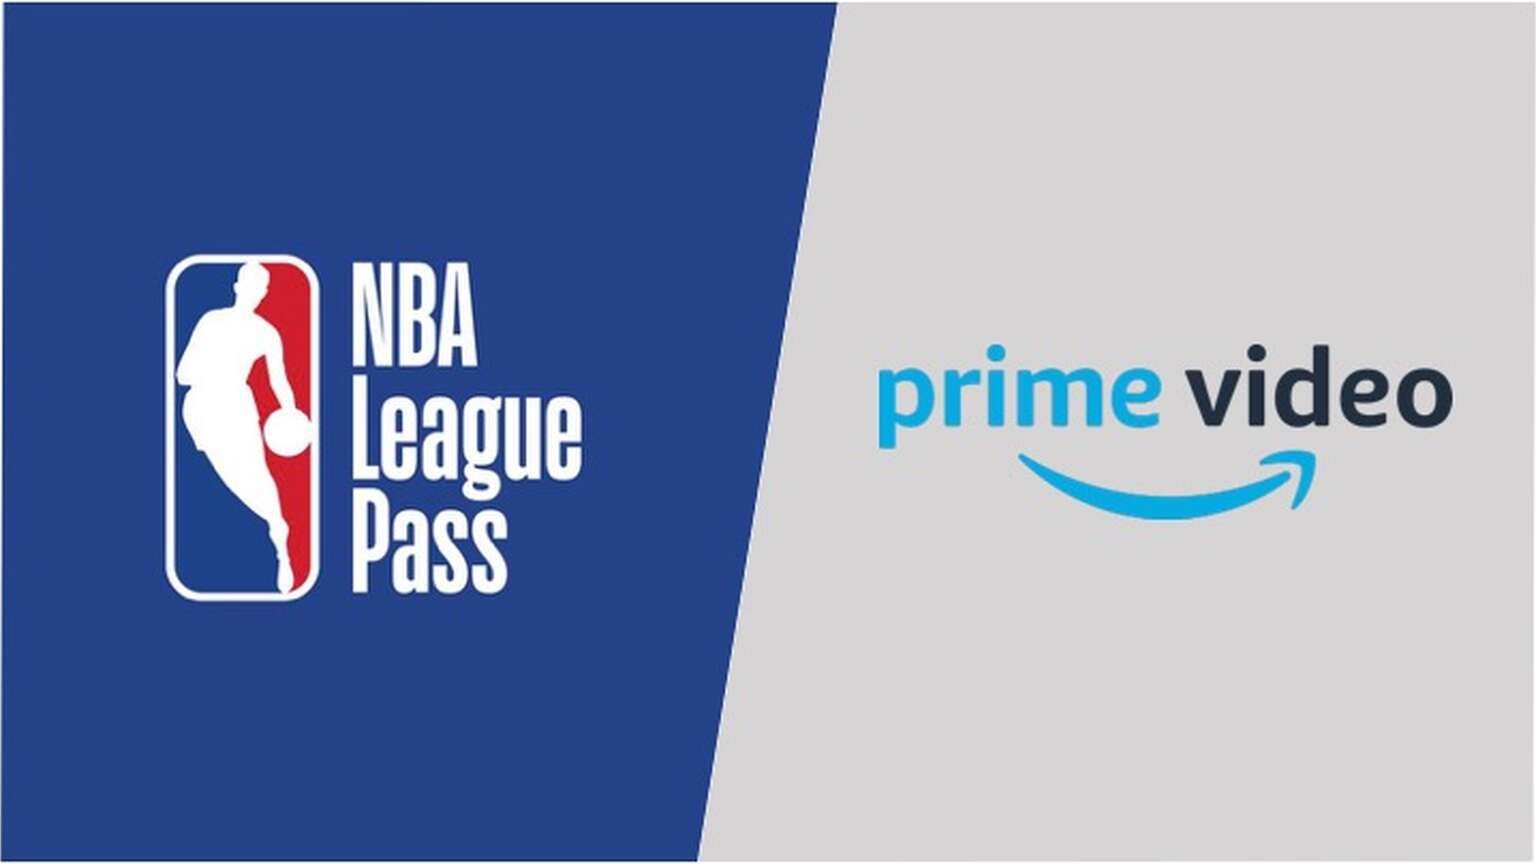 Amazon Prime Video Offering Free Trial of NBA League Pass Through January 25th